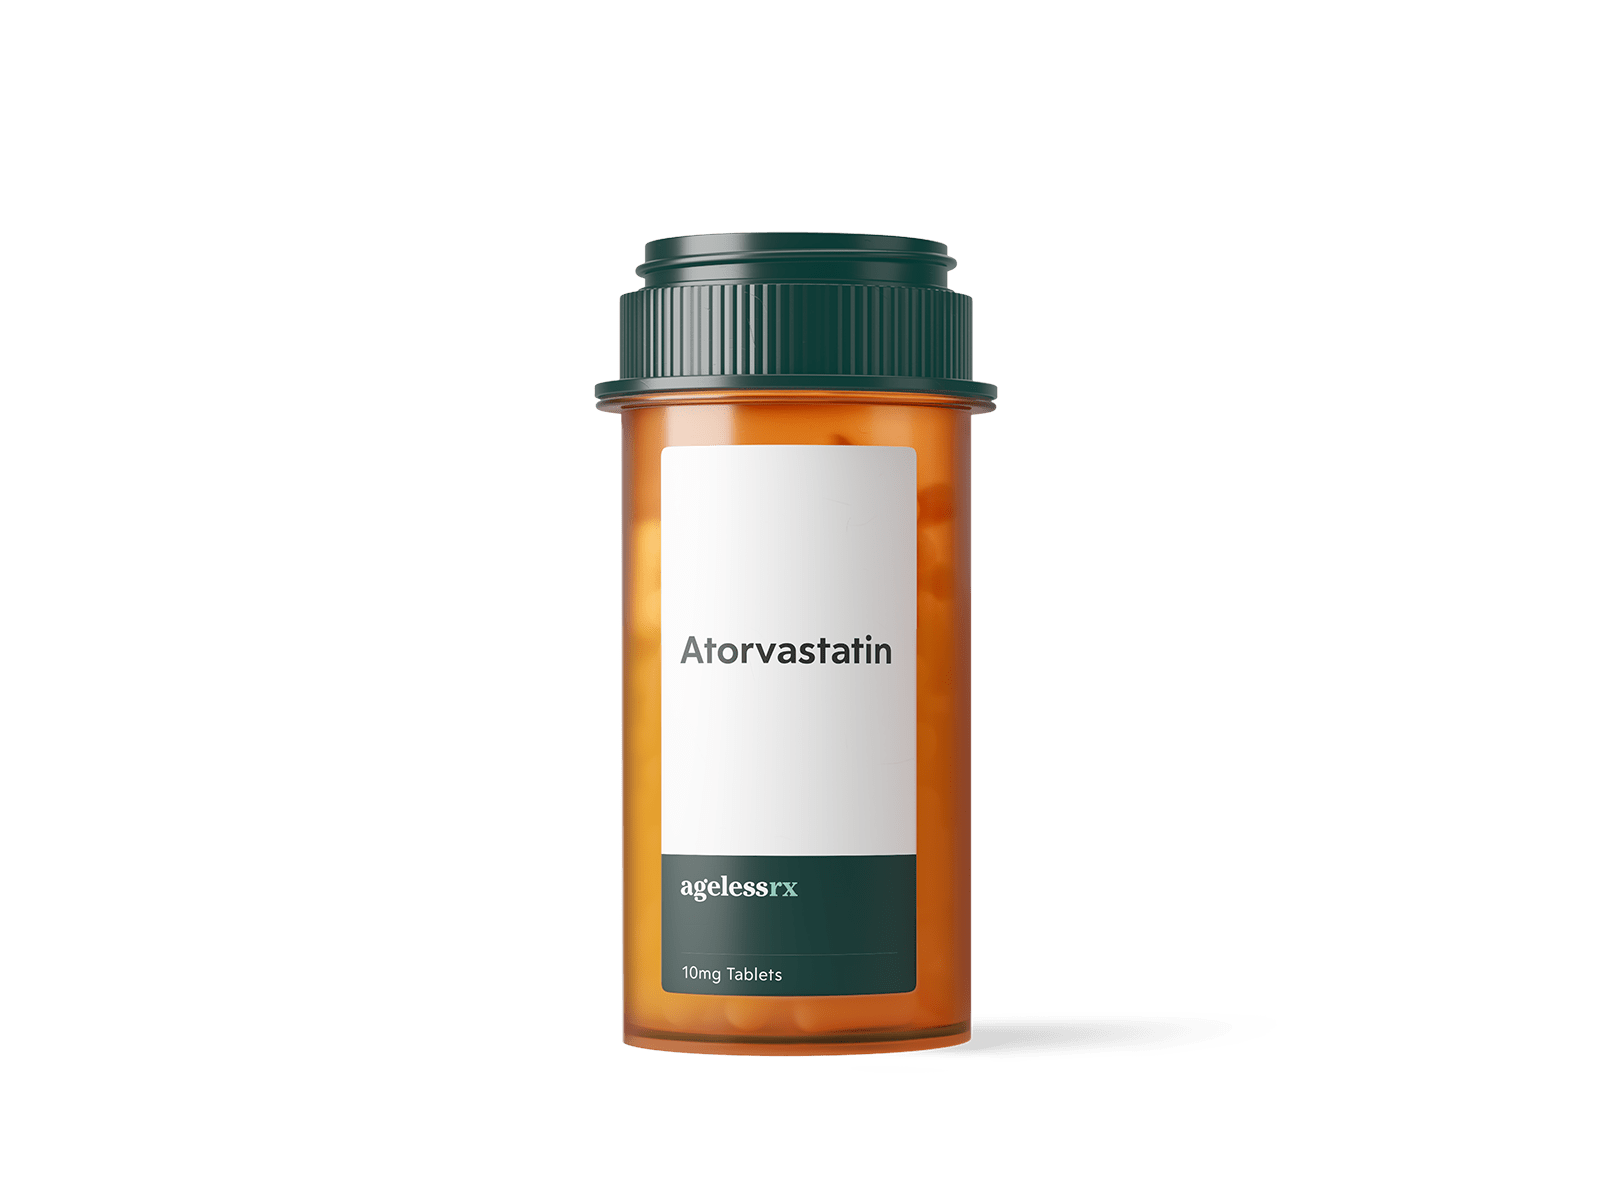 Product image for Atorvastatin